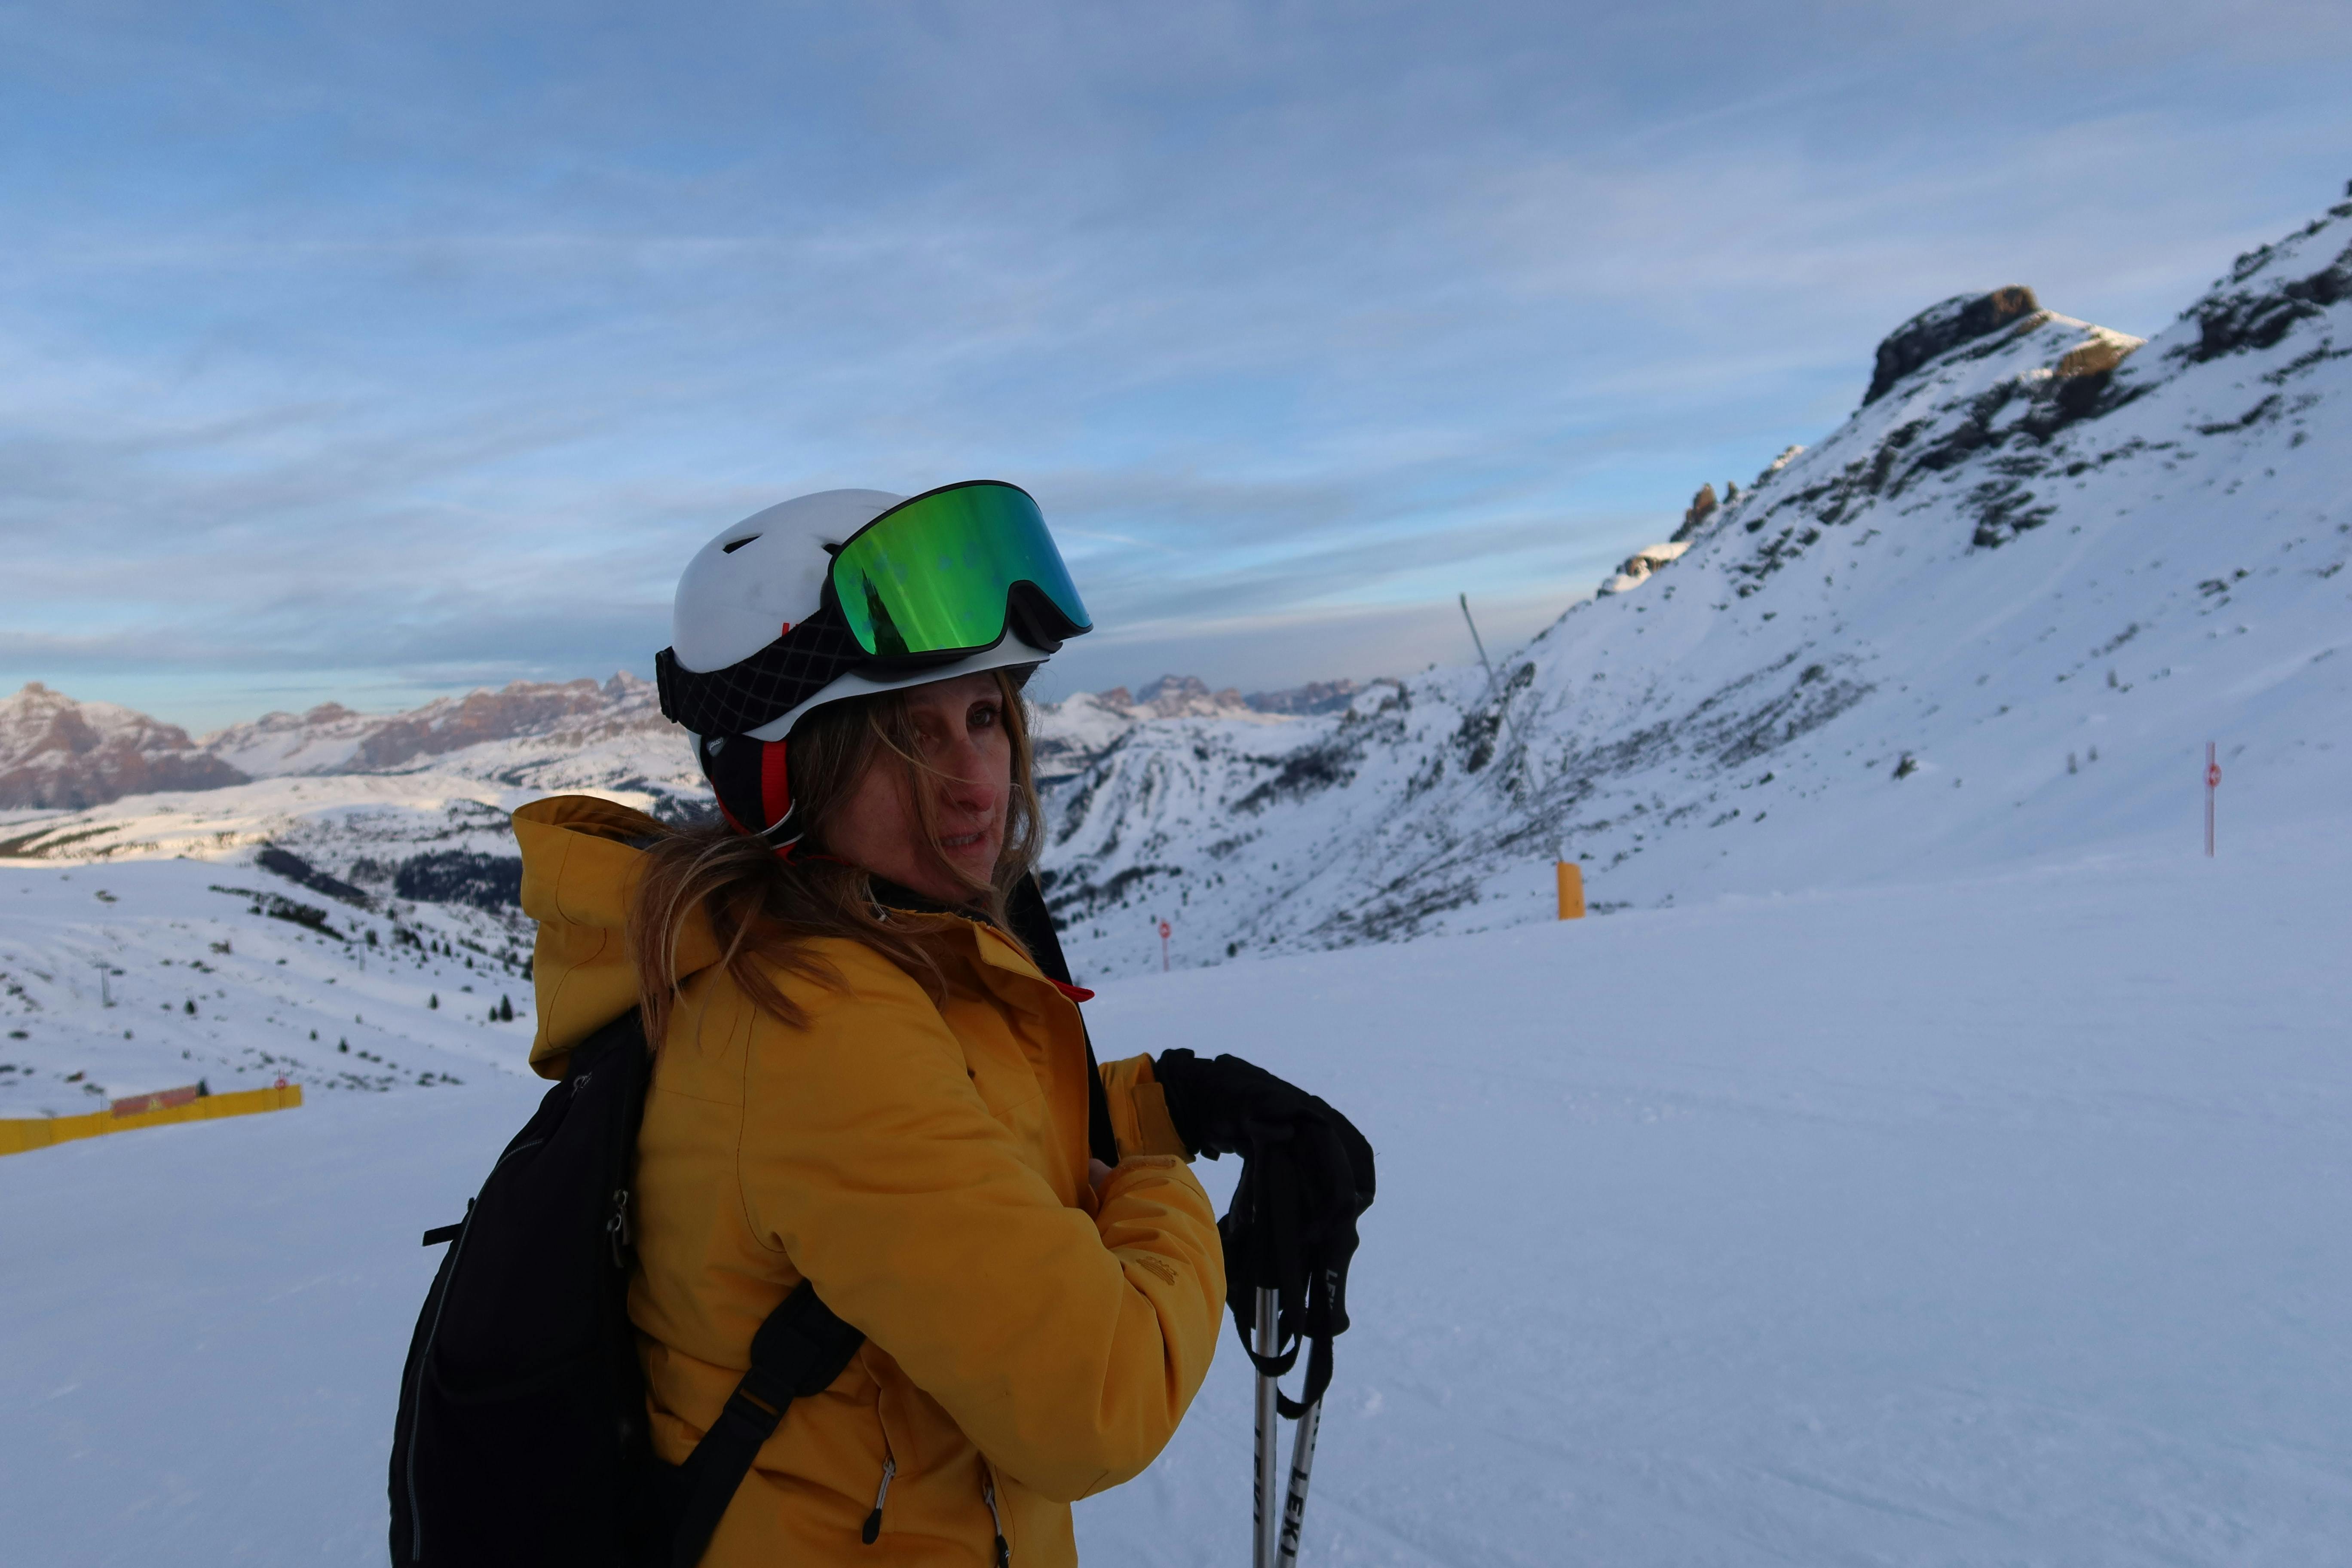 A skier standing in the snow with a helmet and goggles on. She is looking at the camera and there is a snowy mountain in the background. 